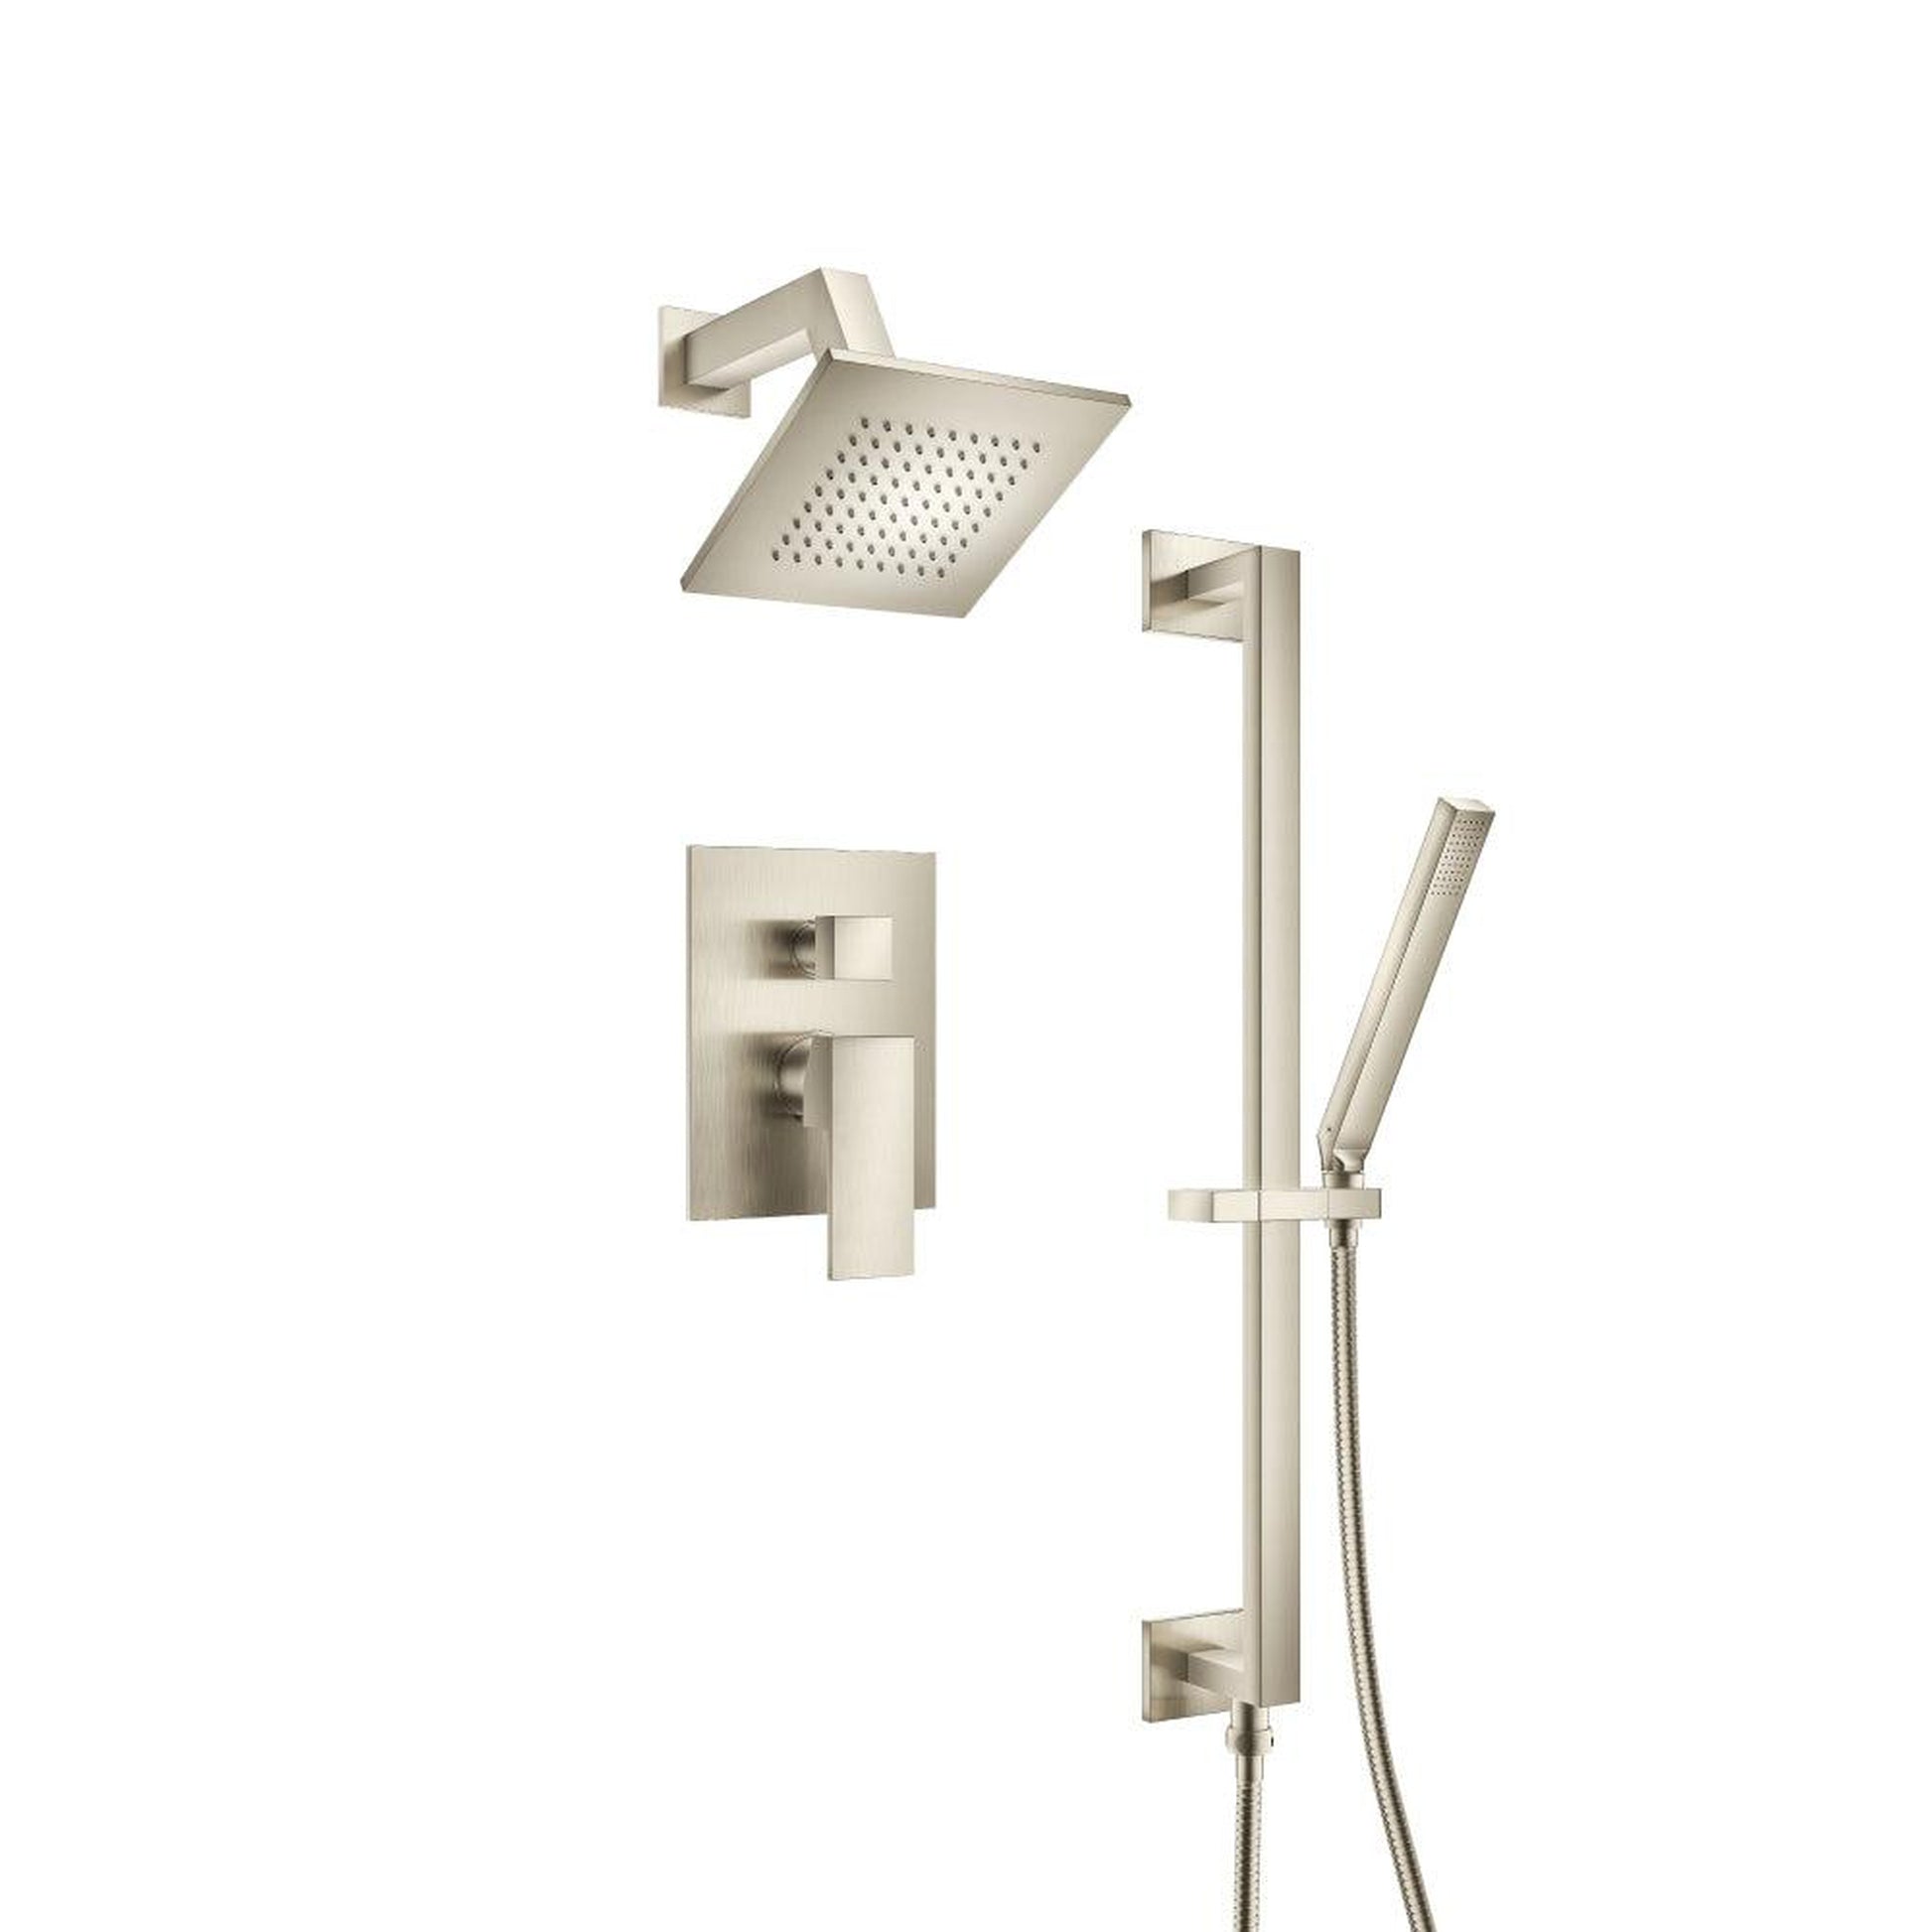 Isenberg Serie 160 Two Output Shower Set With Shower Head, Hand Held and Slide Bar in Brushed Nickel (160.3400BN)